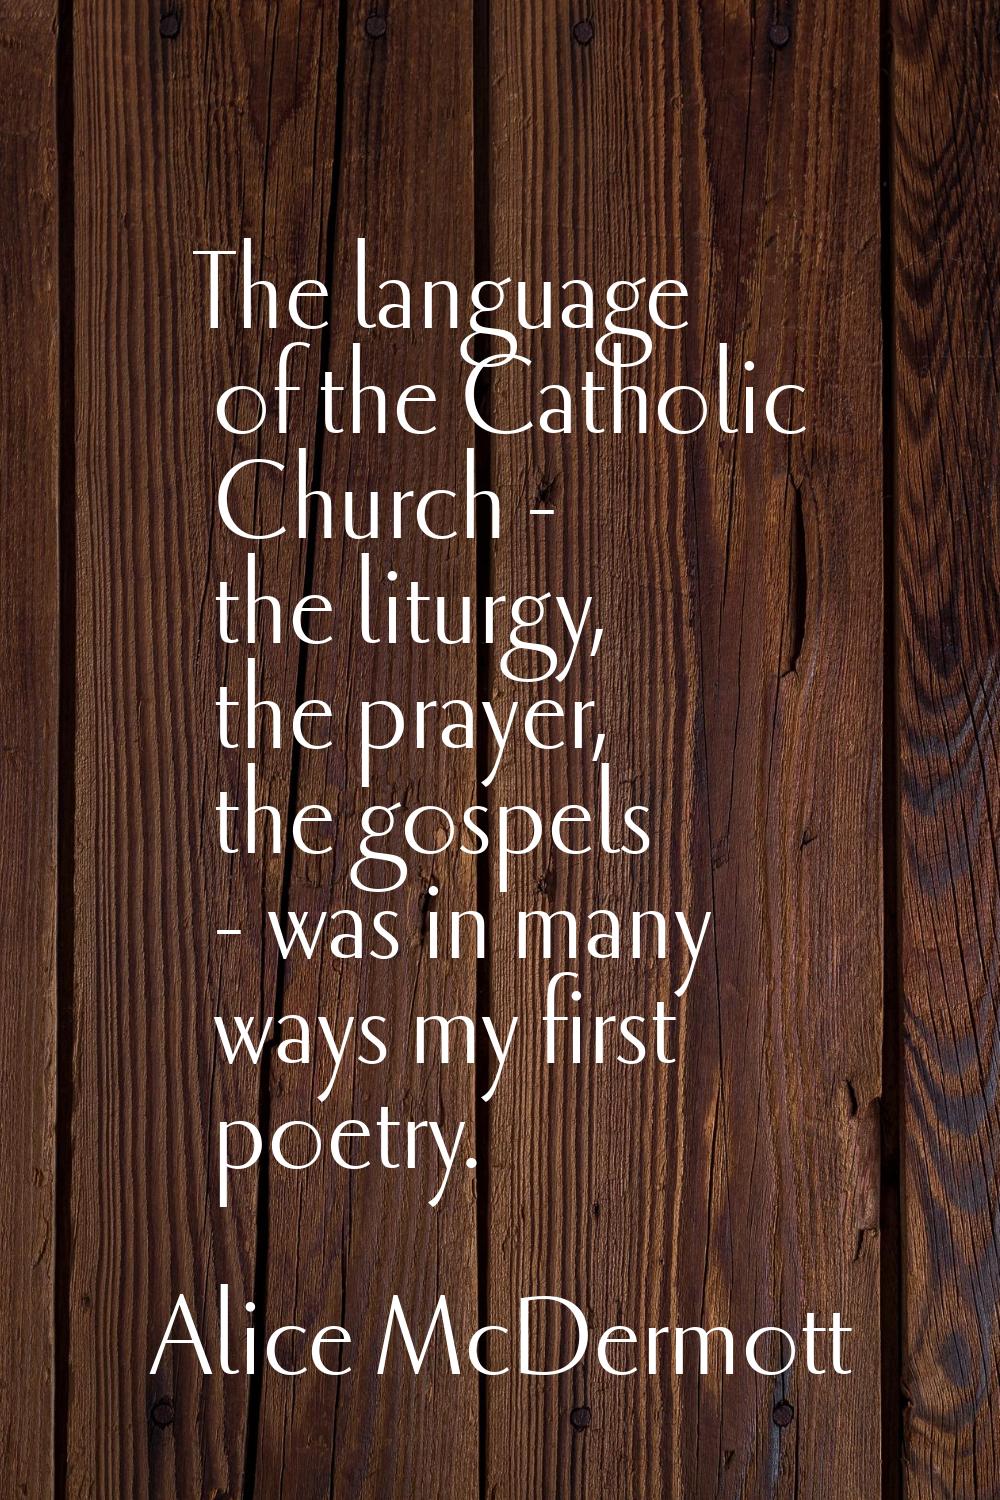 The language of the Catholic Church - the liturgy, the prayer, the gospels - was in many ways my fi